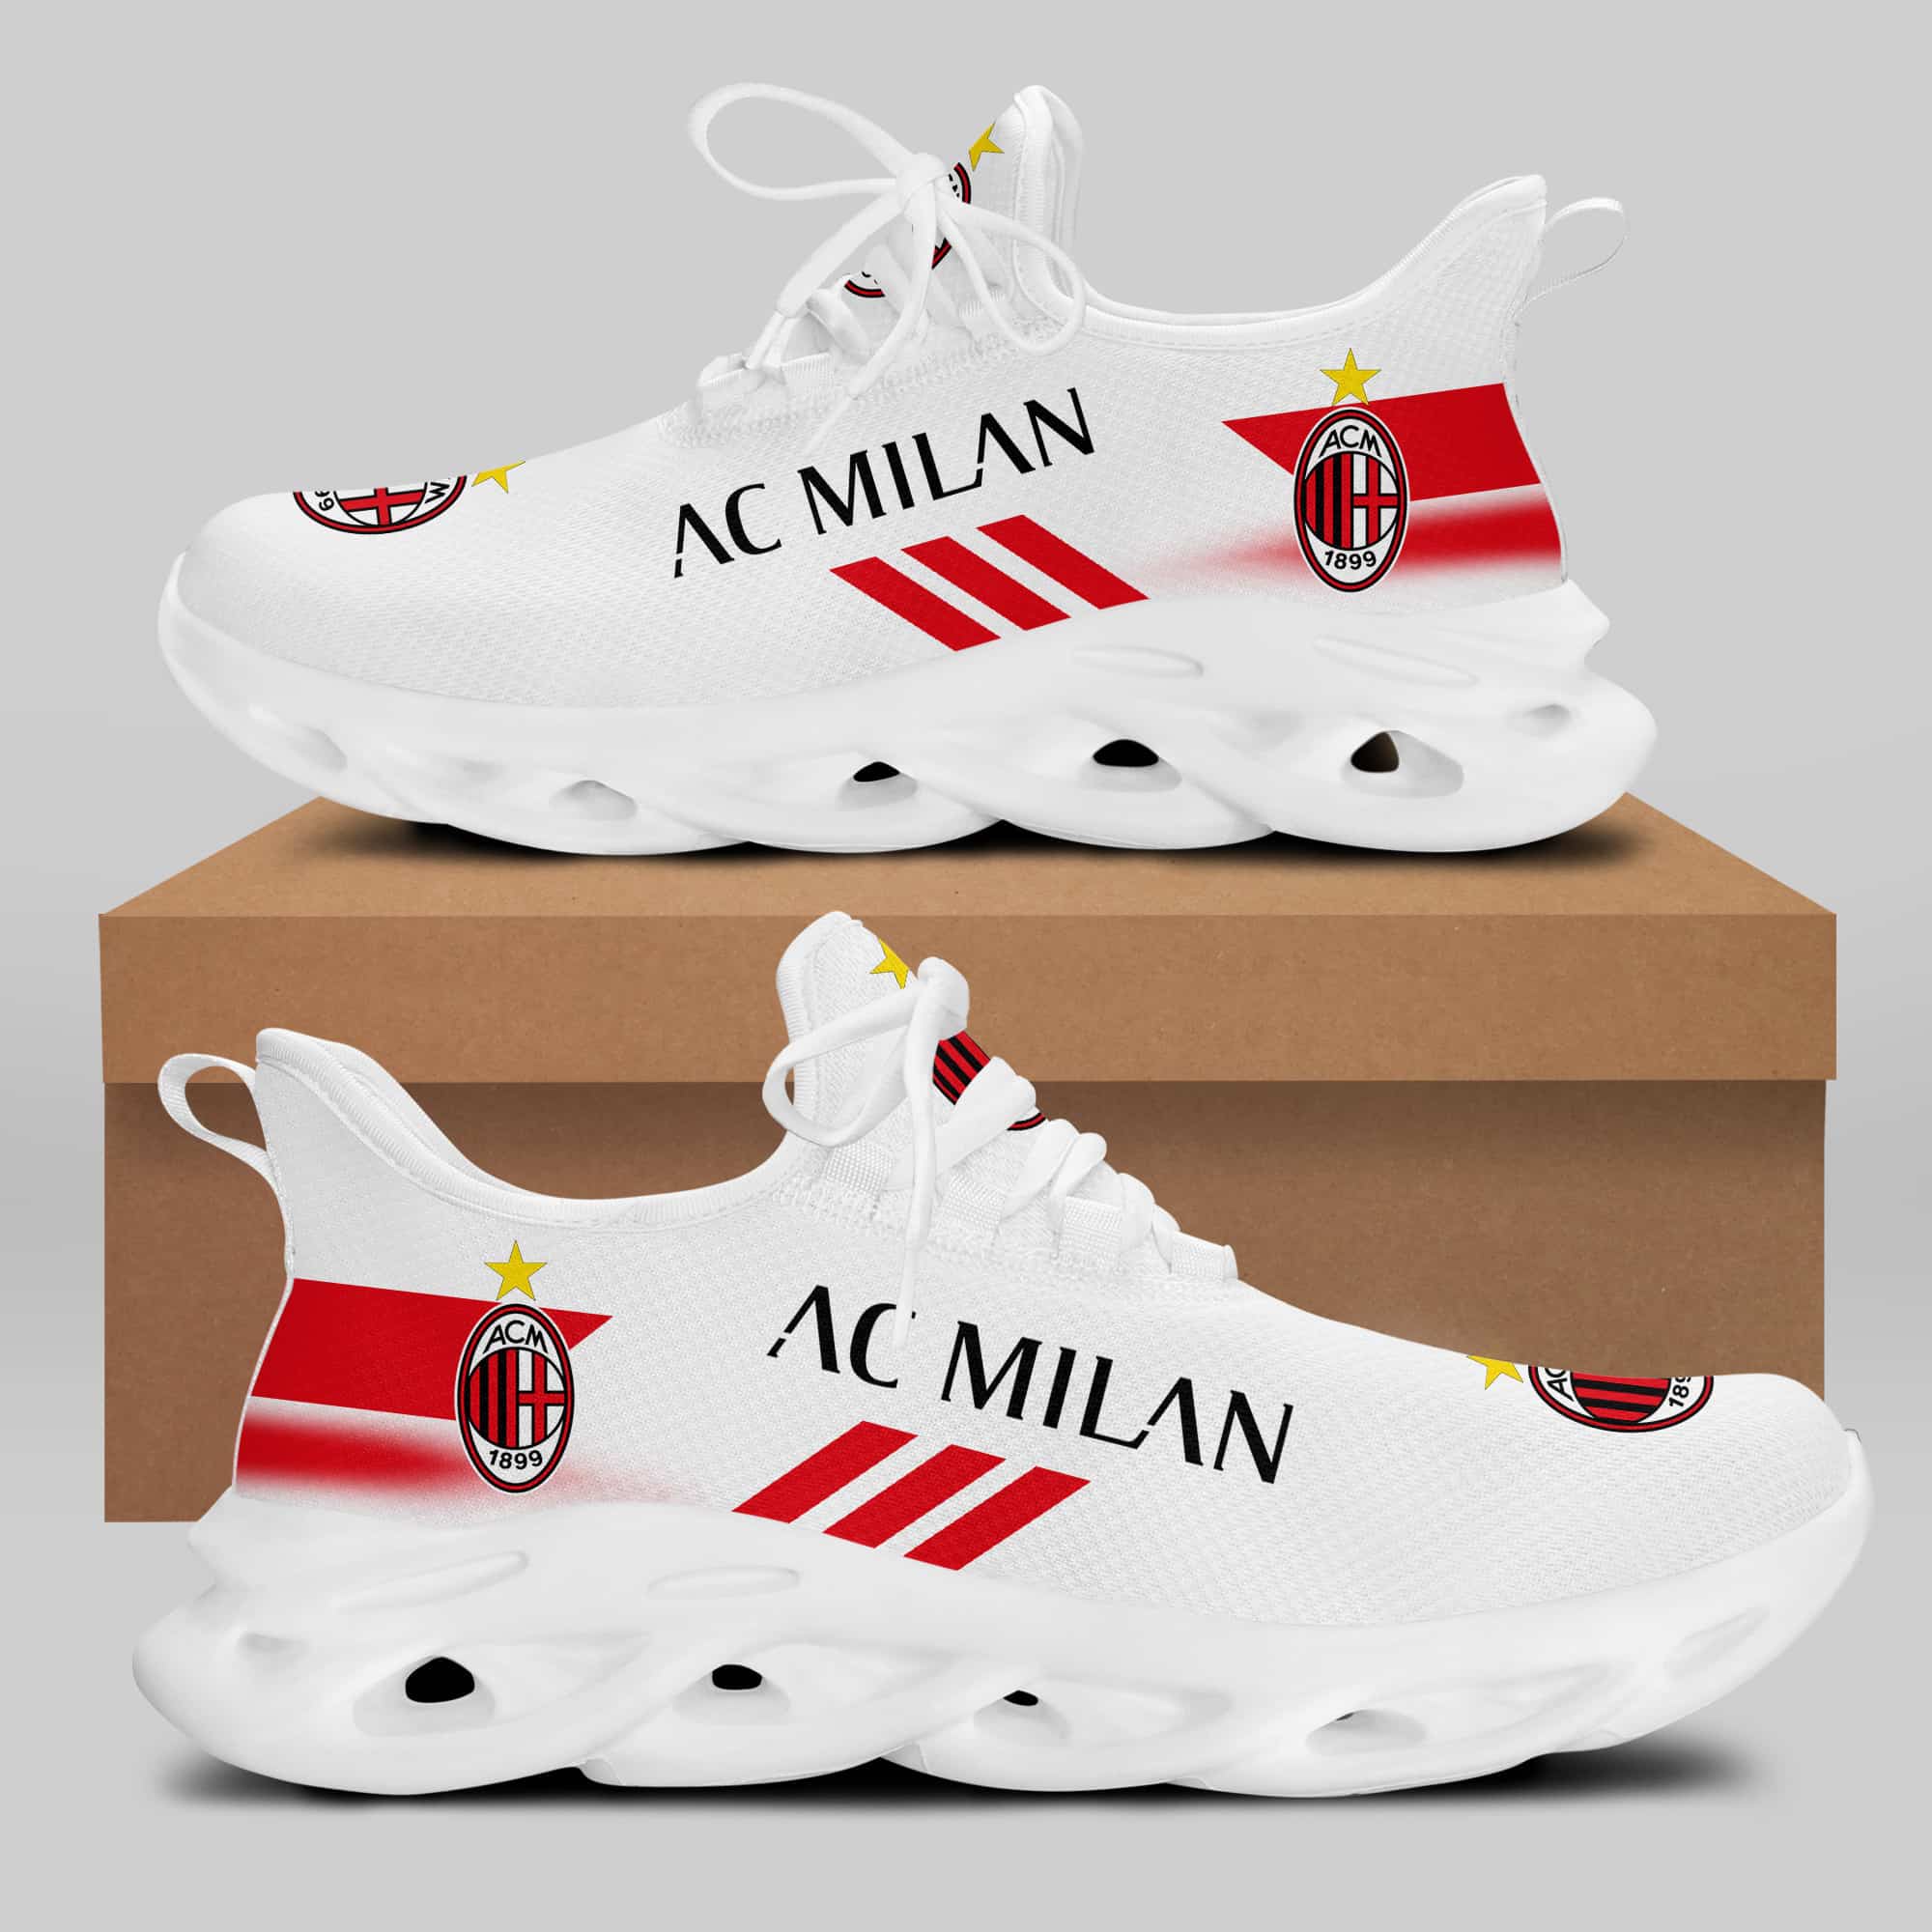 Ac Milan Running Shoes Max Soul Shoes Sneakers Ver 35 1